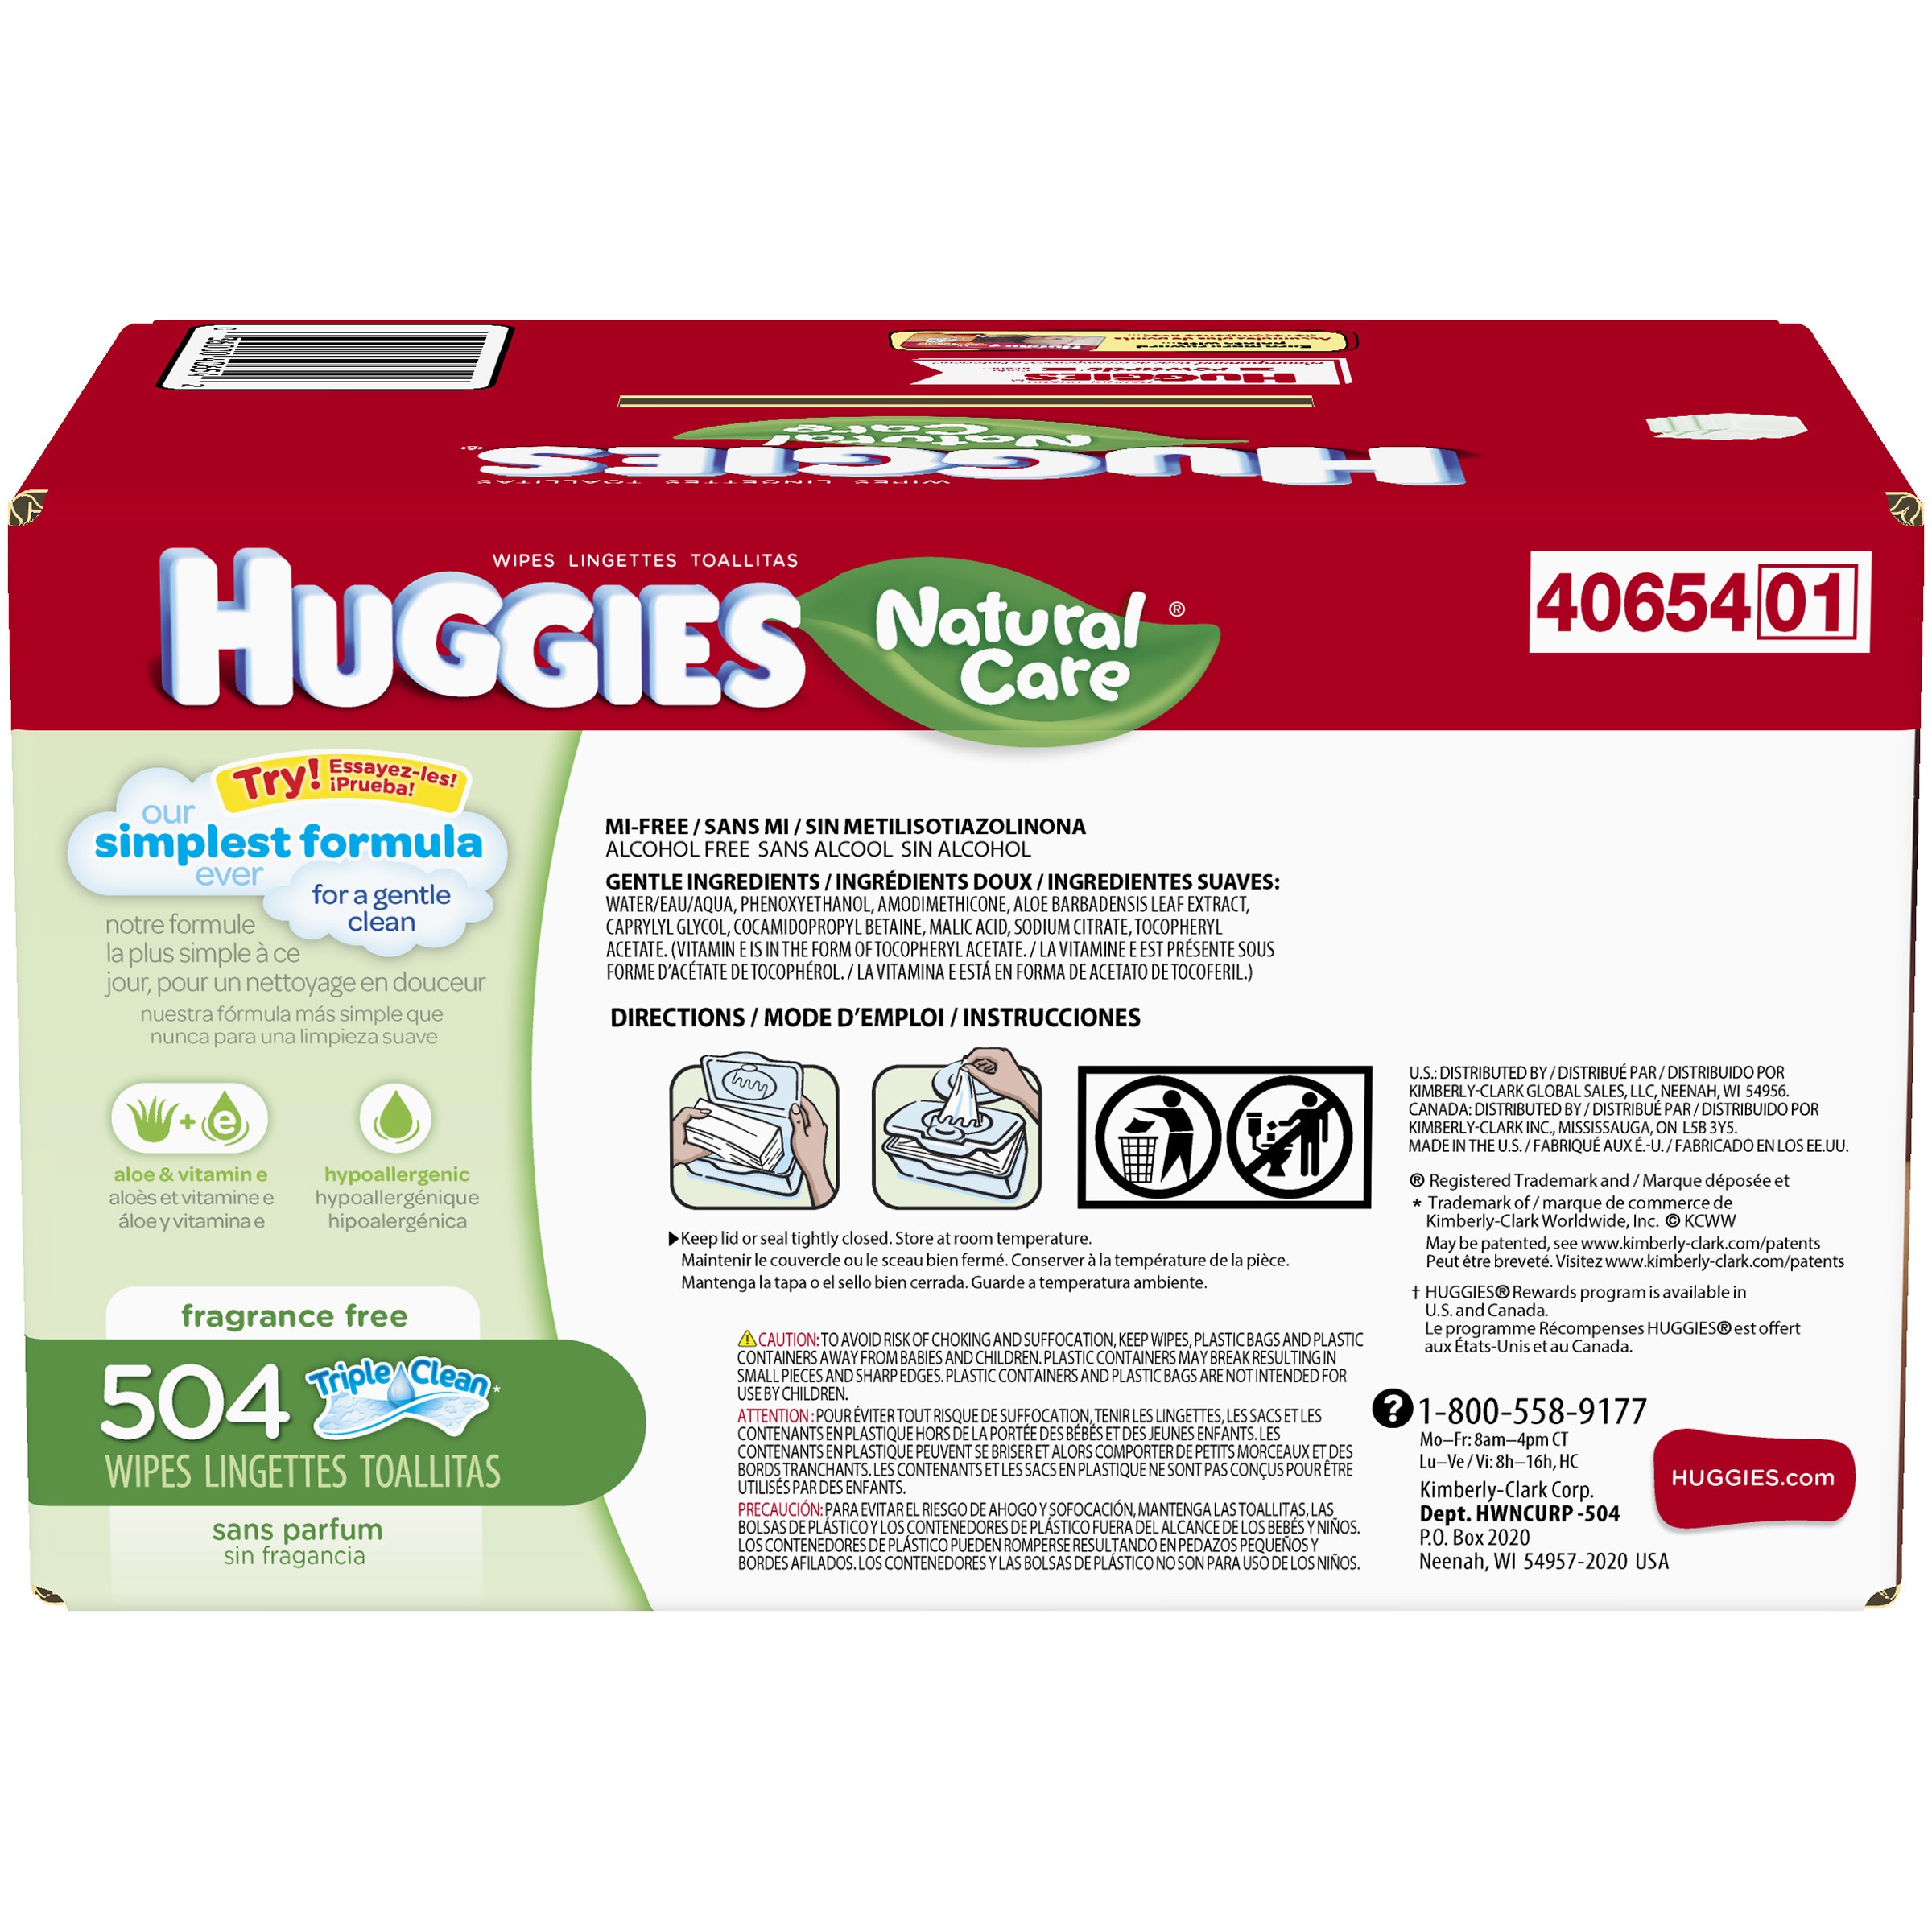 Huggies Natural Care 504 Count - image 3 of 3